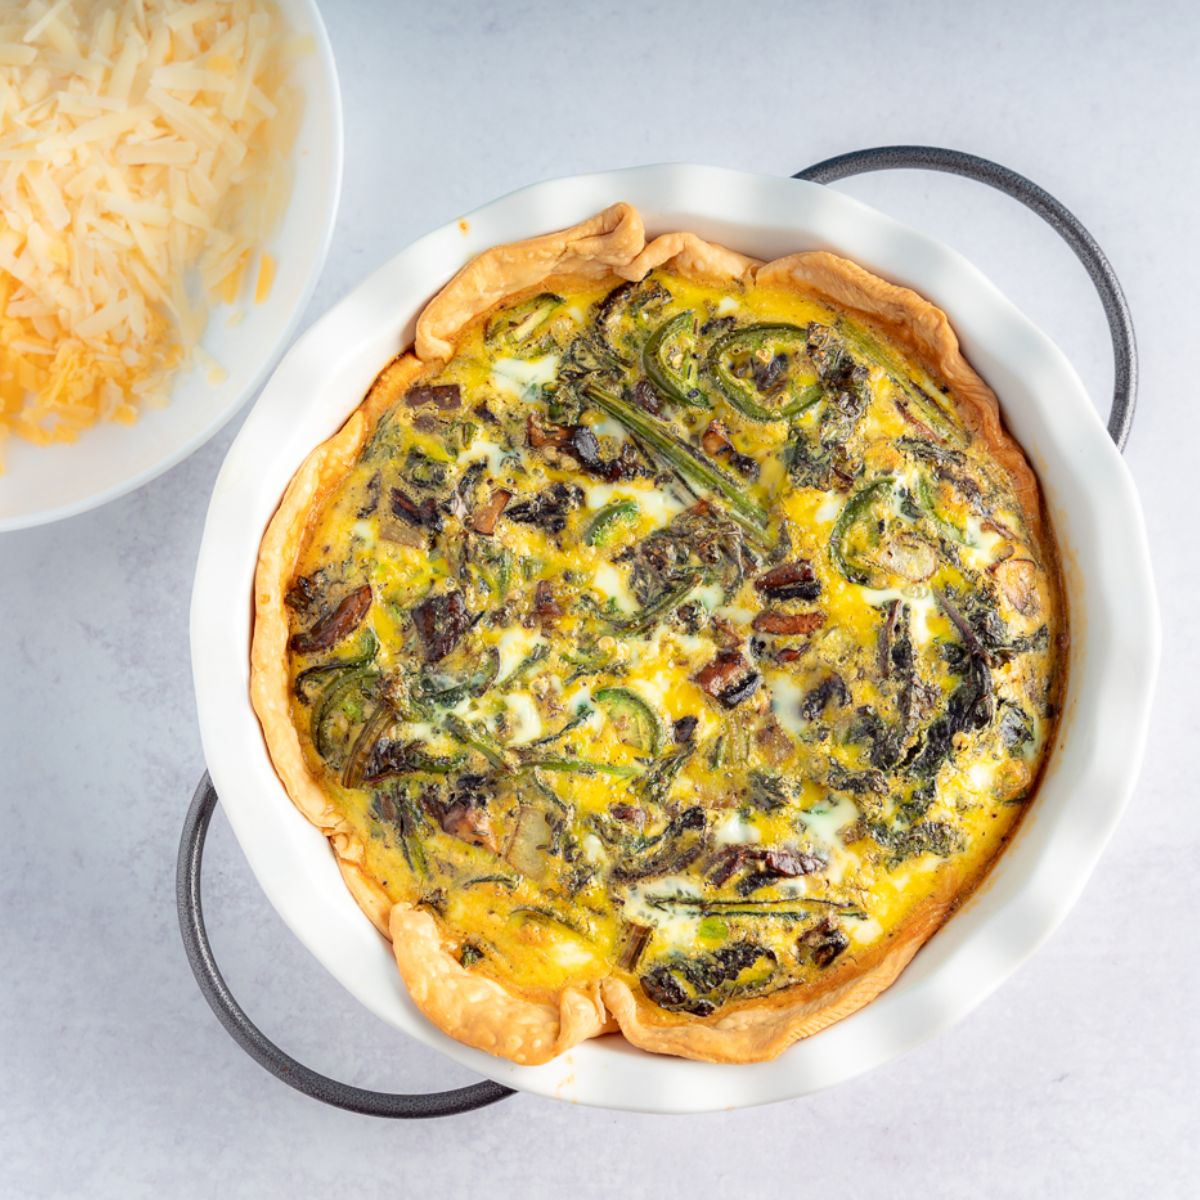 Mushroom Quiche in a white pie pan with shredded cheeses to the left side of the image